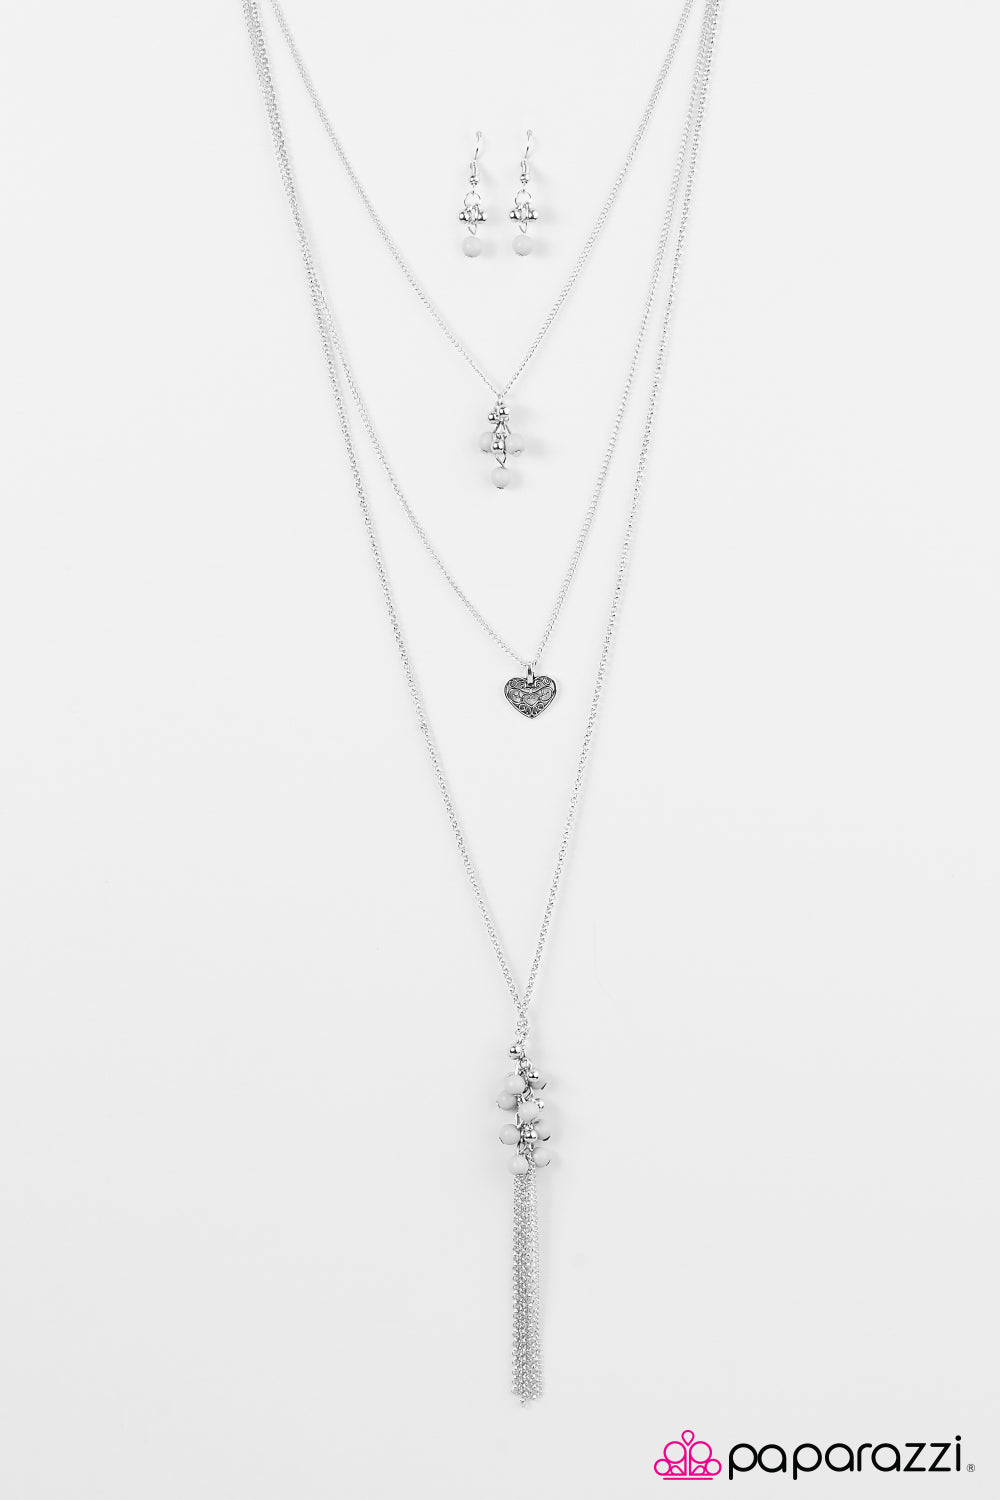 Paparazzi ♥ Whats Not To Love? - Silver ♥  Necklace